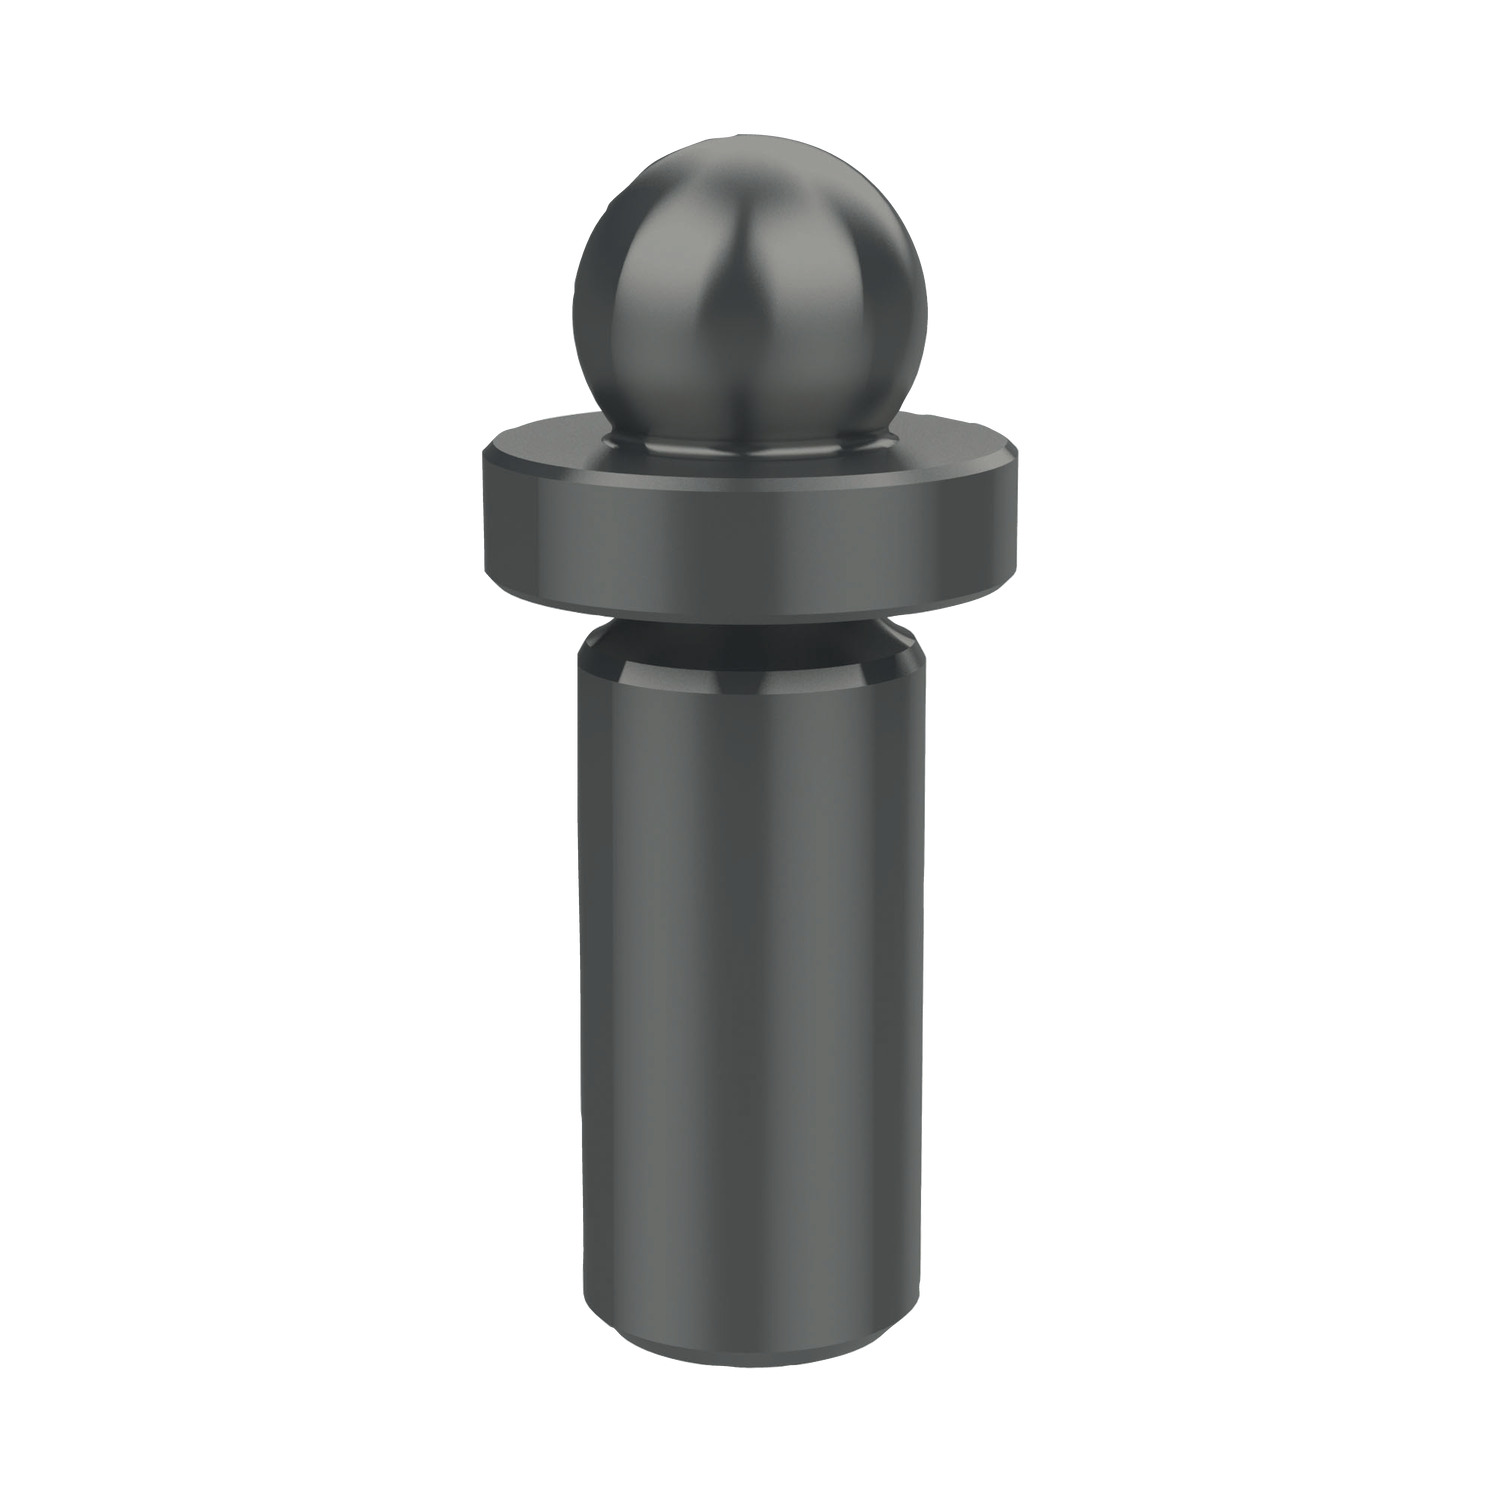 Tooling Balls - Carbide Carbide tooling balls with stainless shank. Available in imperial measurements.